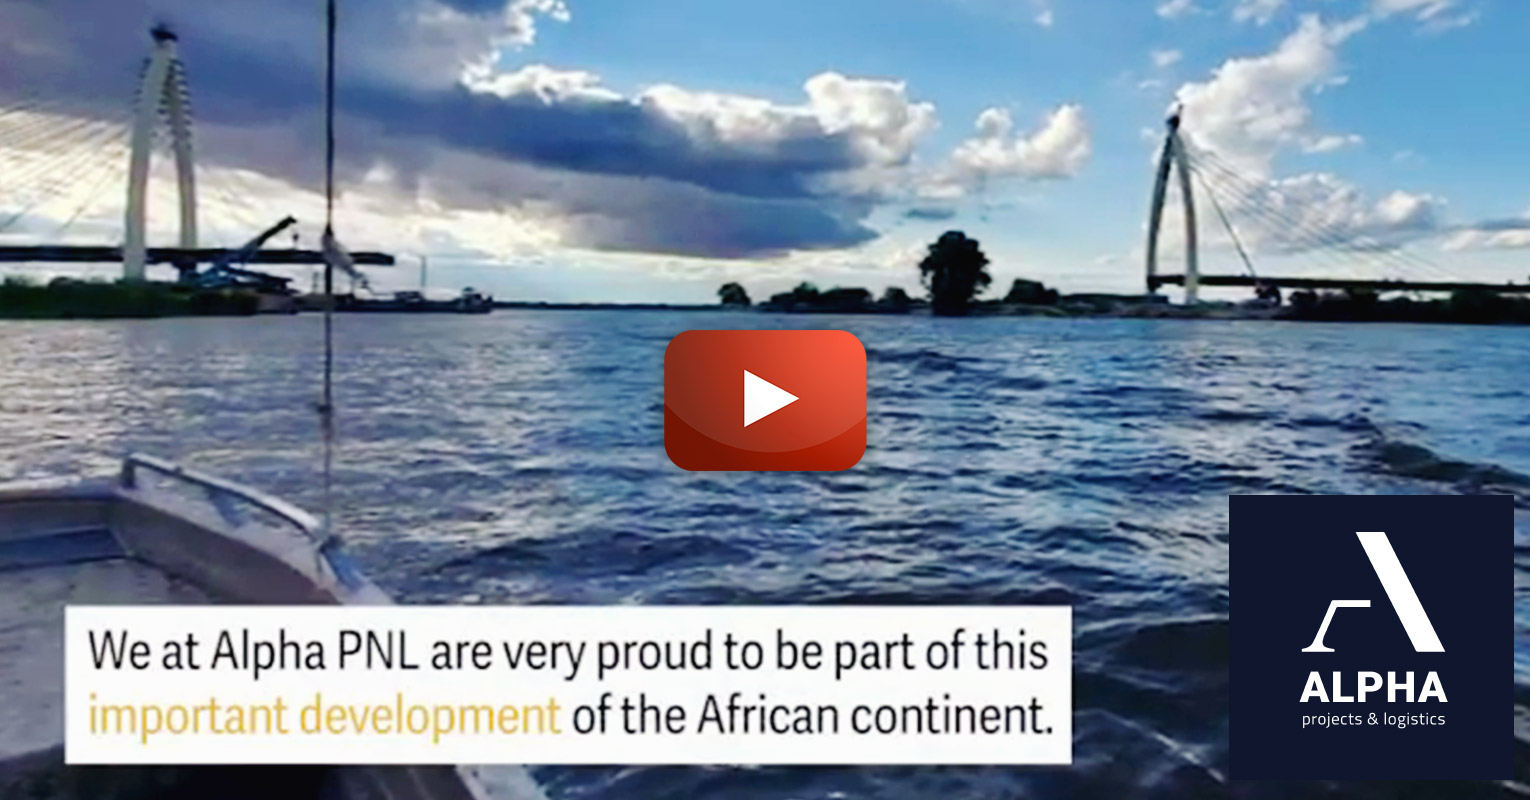 Video - Alpha Projects & Logistics Delivered Vital Shipments for the Completion of Okavango Bridge in Botswana